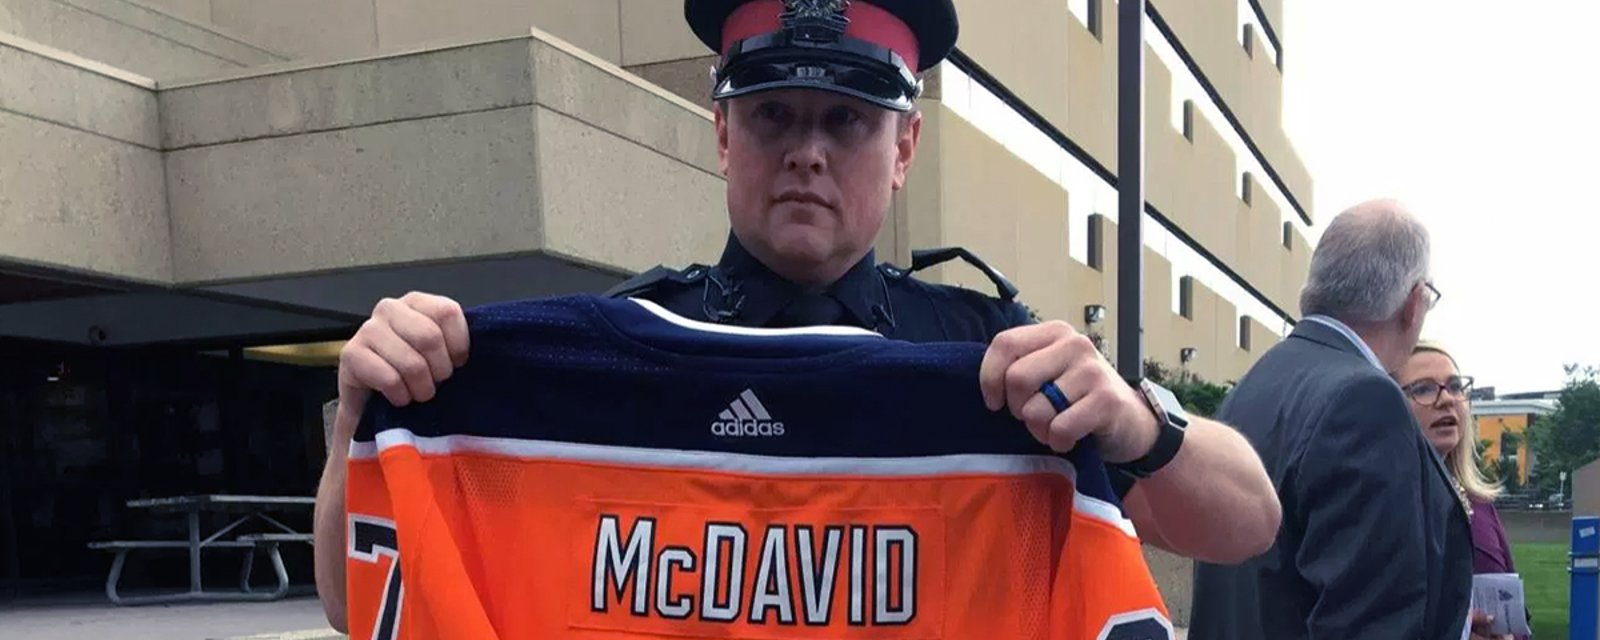 McDavid partners with Edmonton police to bust local scam artist